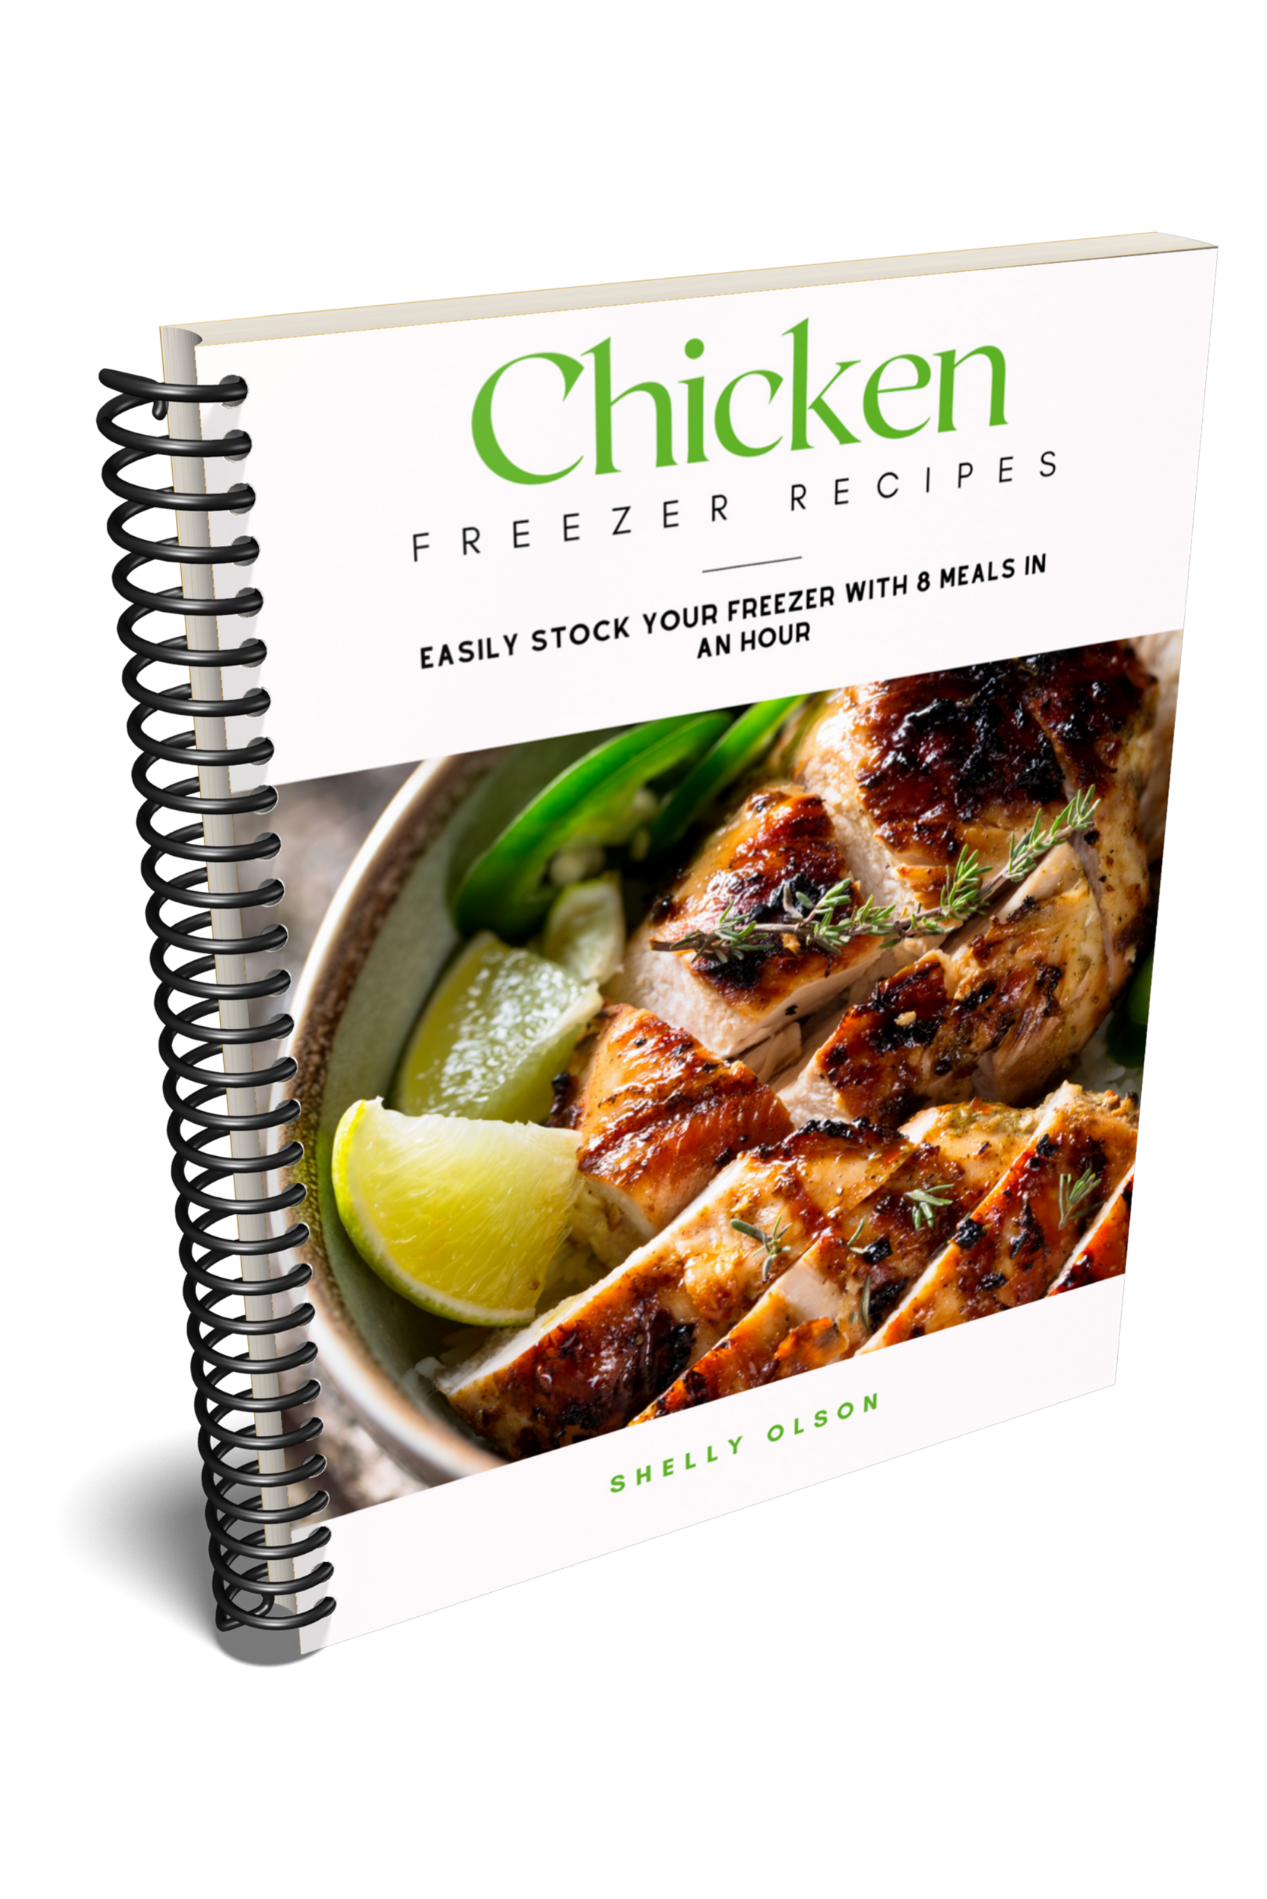 Get the 8 chicken recipes in an hour cookbook.